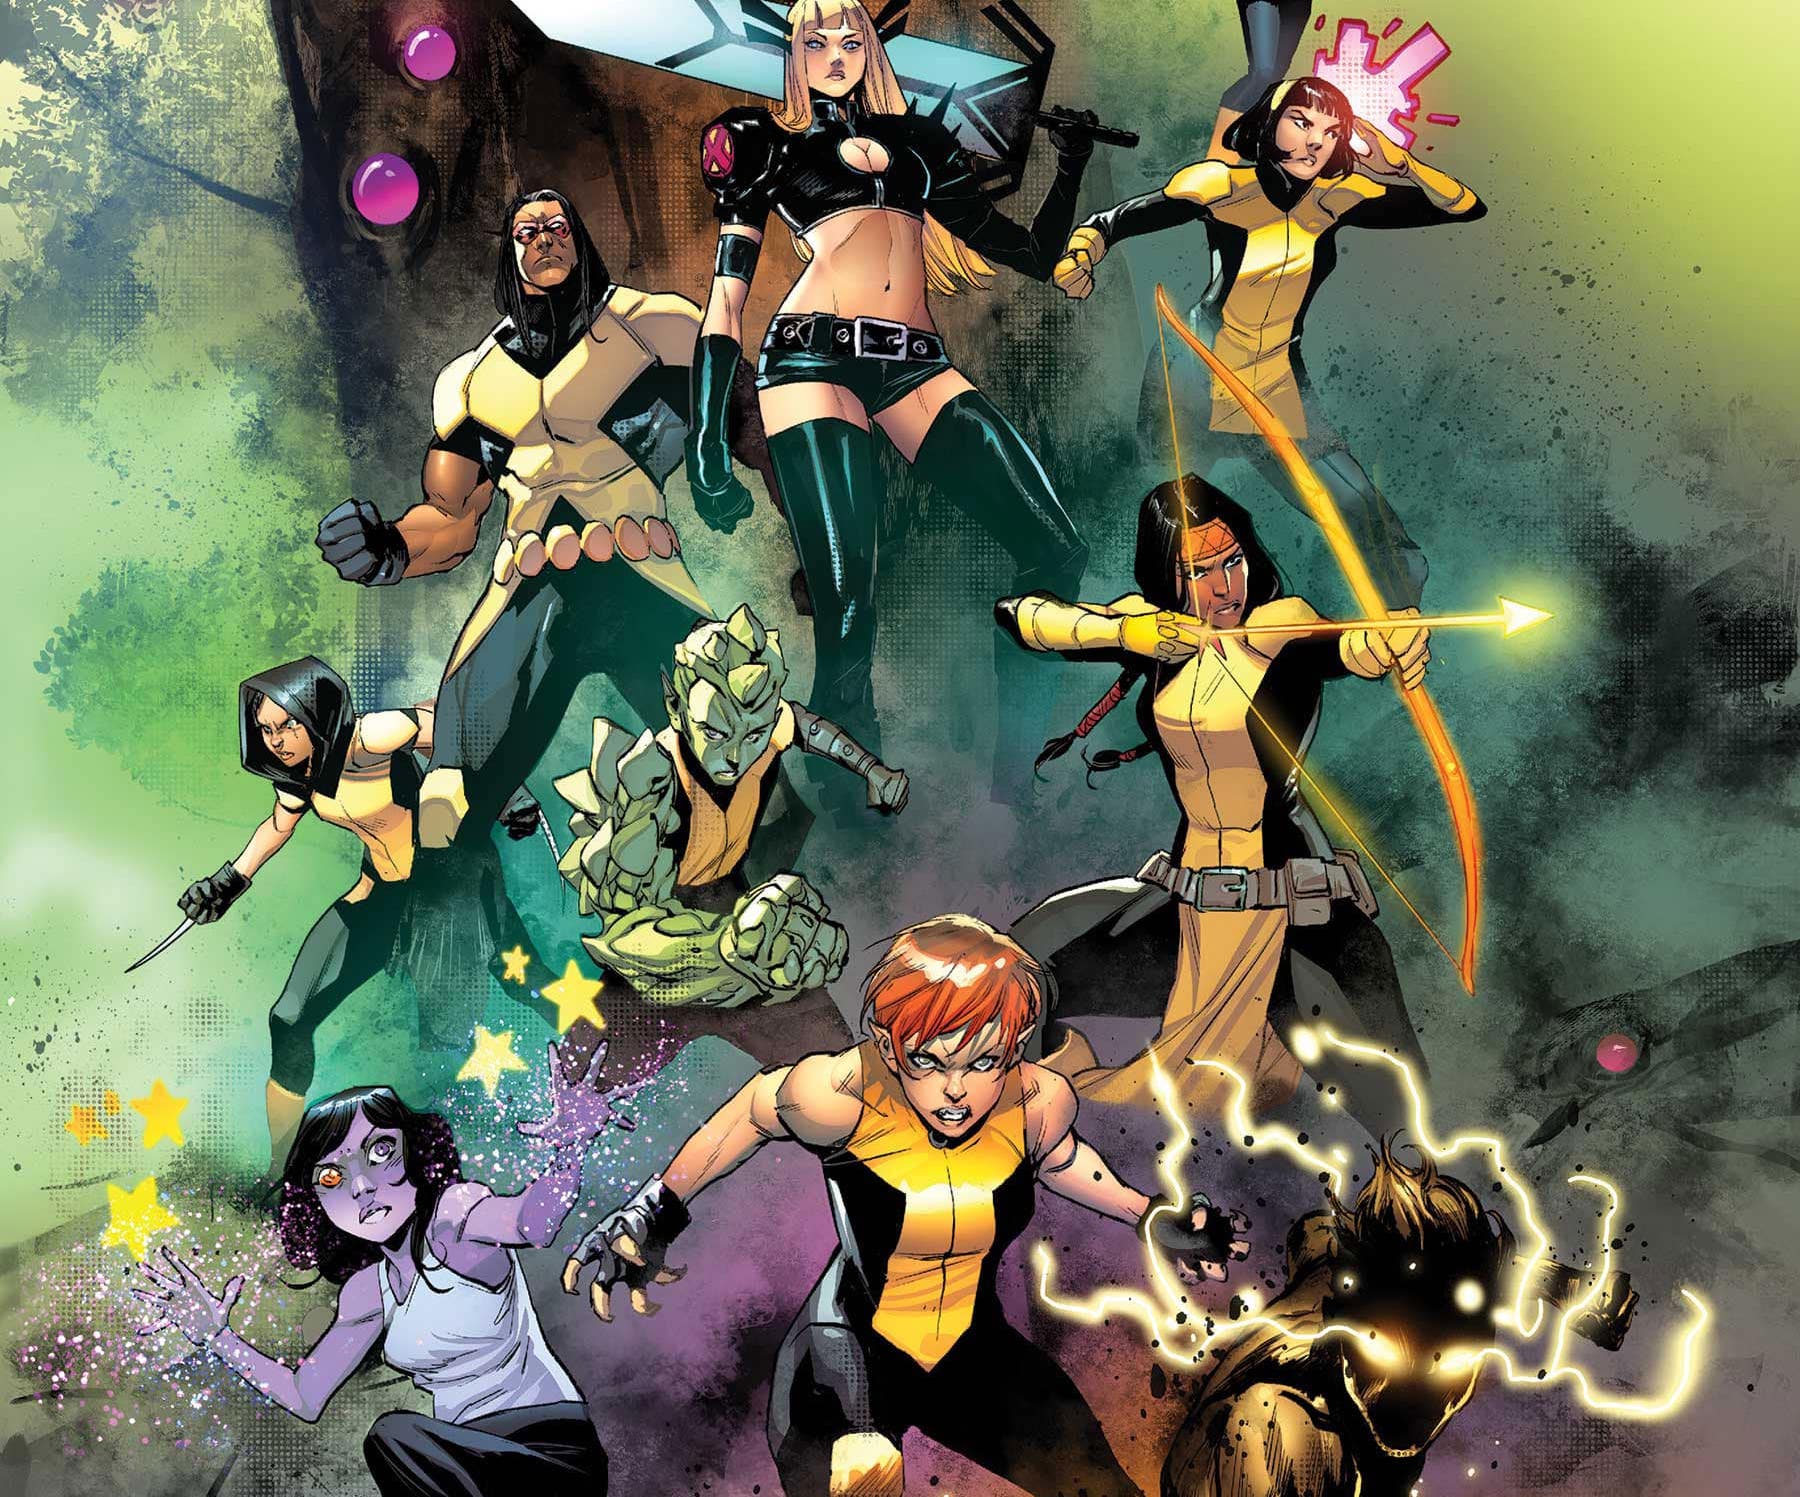 New Mutants #30 gets giant-size 40th anniversary issue